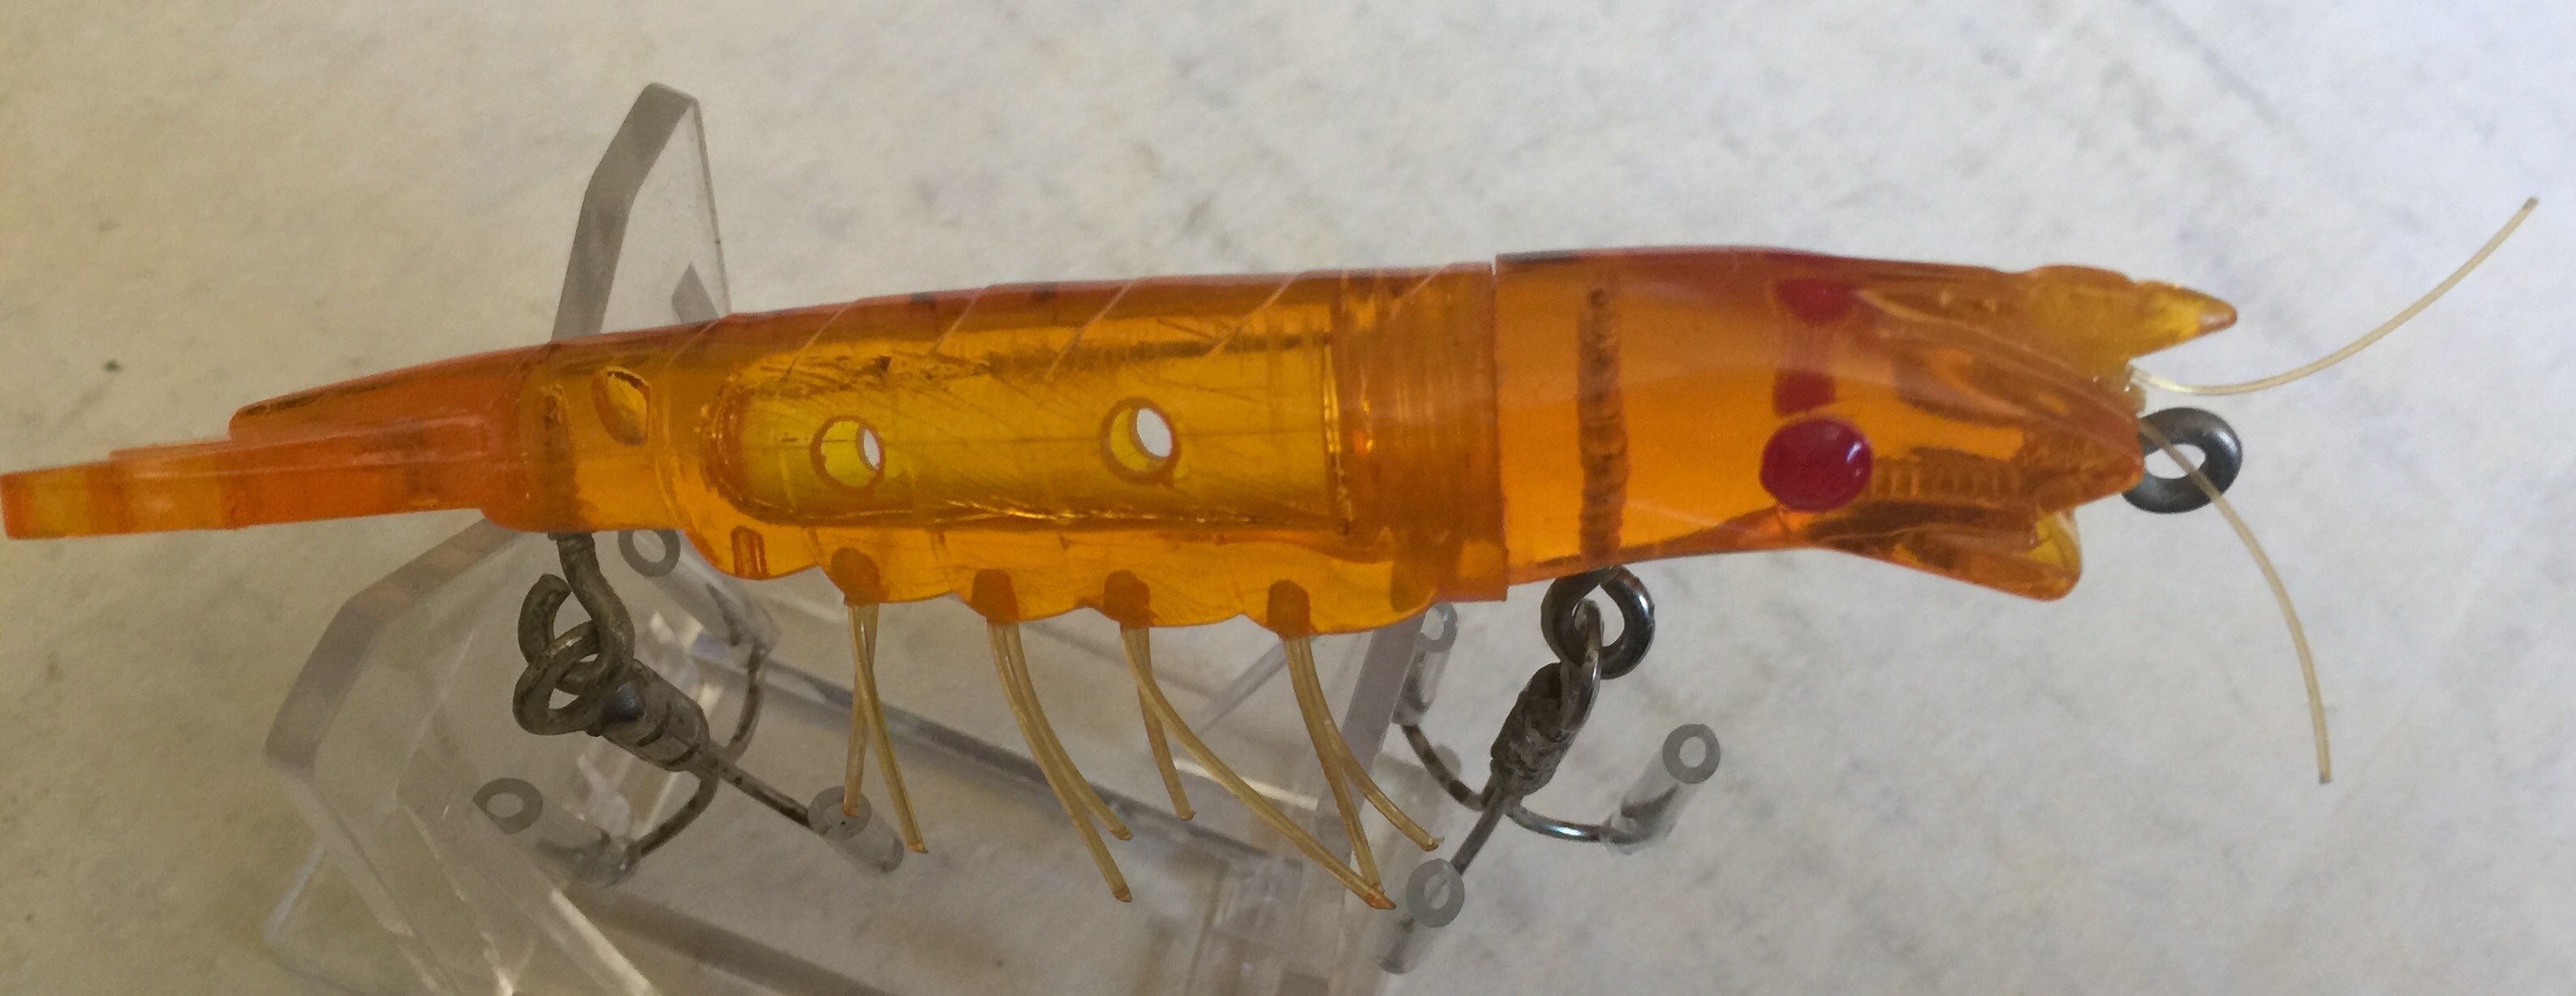 Manning's Shrimp Lure/green and yellow box